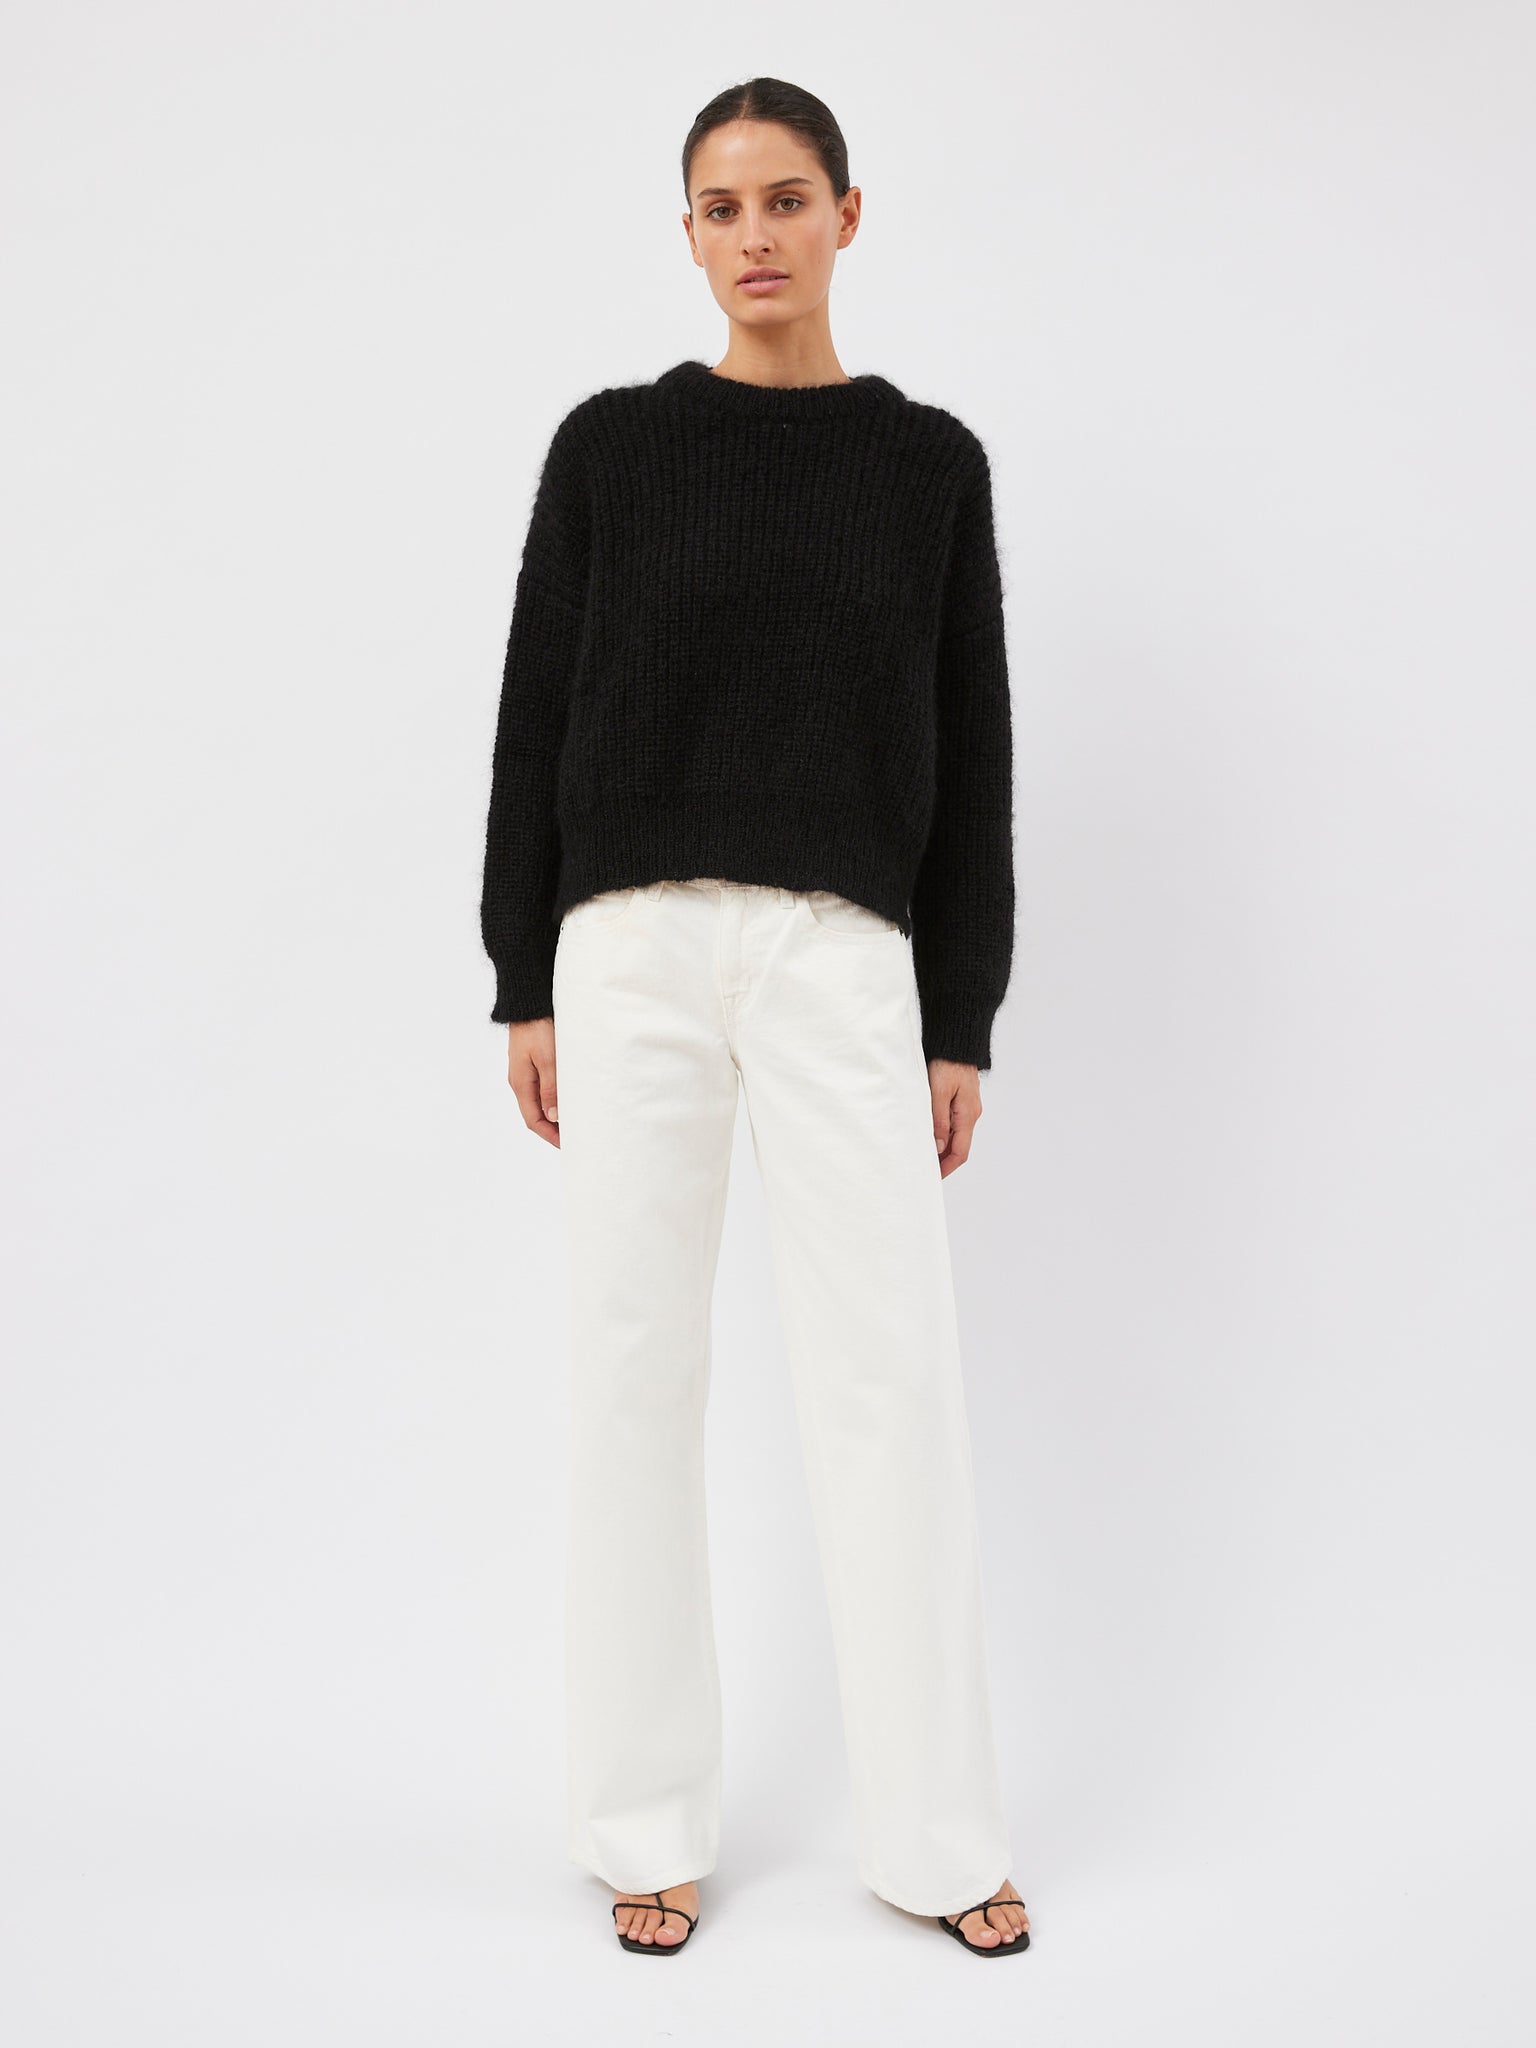 Marle | Bonnie Jumper in Black | The UNDONE by Marle